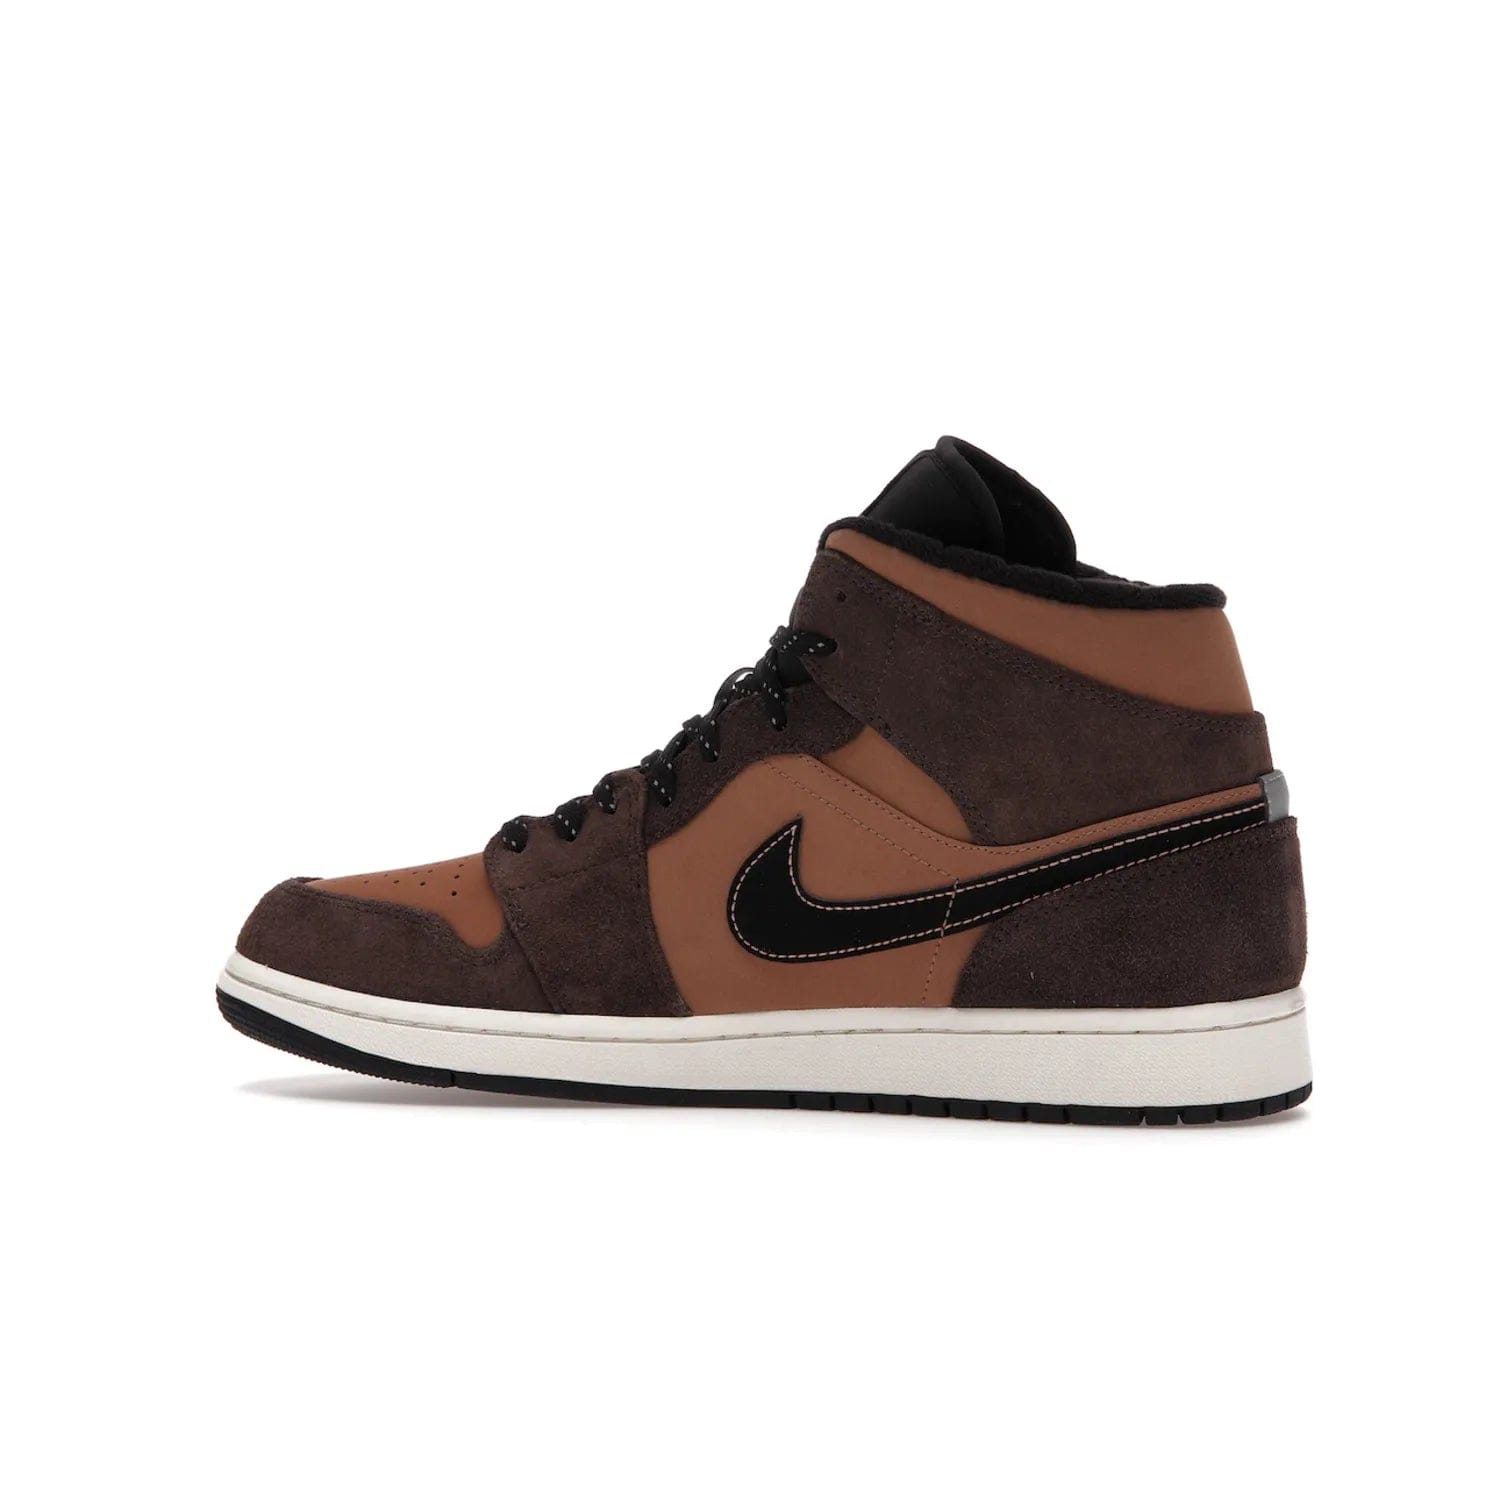 Jordan 1 Mid SE Dark Chocolate - Image 21 - Only at www.BallersClubKickz.com - This fashionable and functional Jordan 1 Mid SE Dark Chocolate features a light brown Durabuck upper, dark brown suede overlays, black Swoosh logos and reflective patch at heel. A must-have for any sneakerhead!